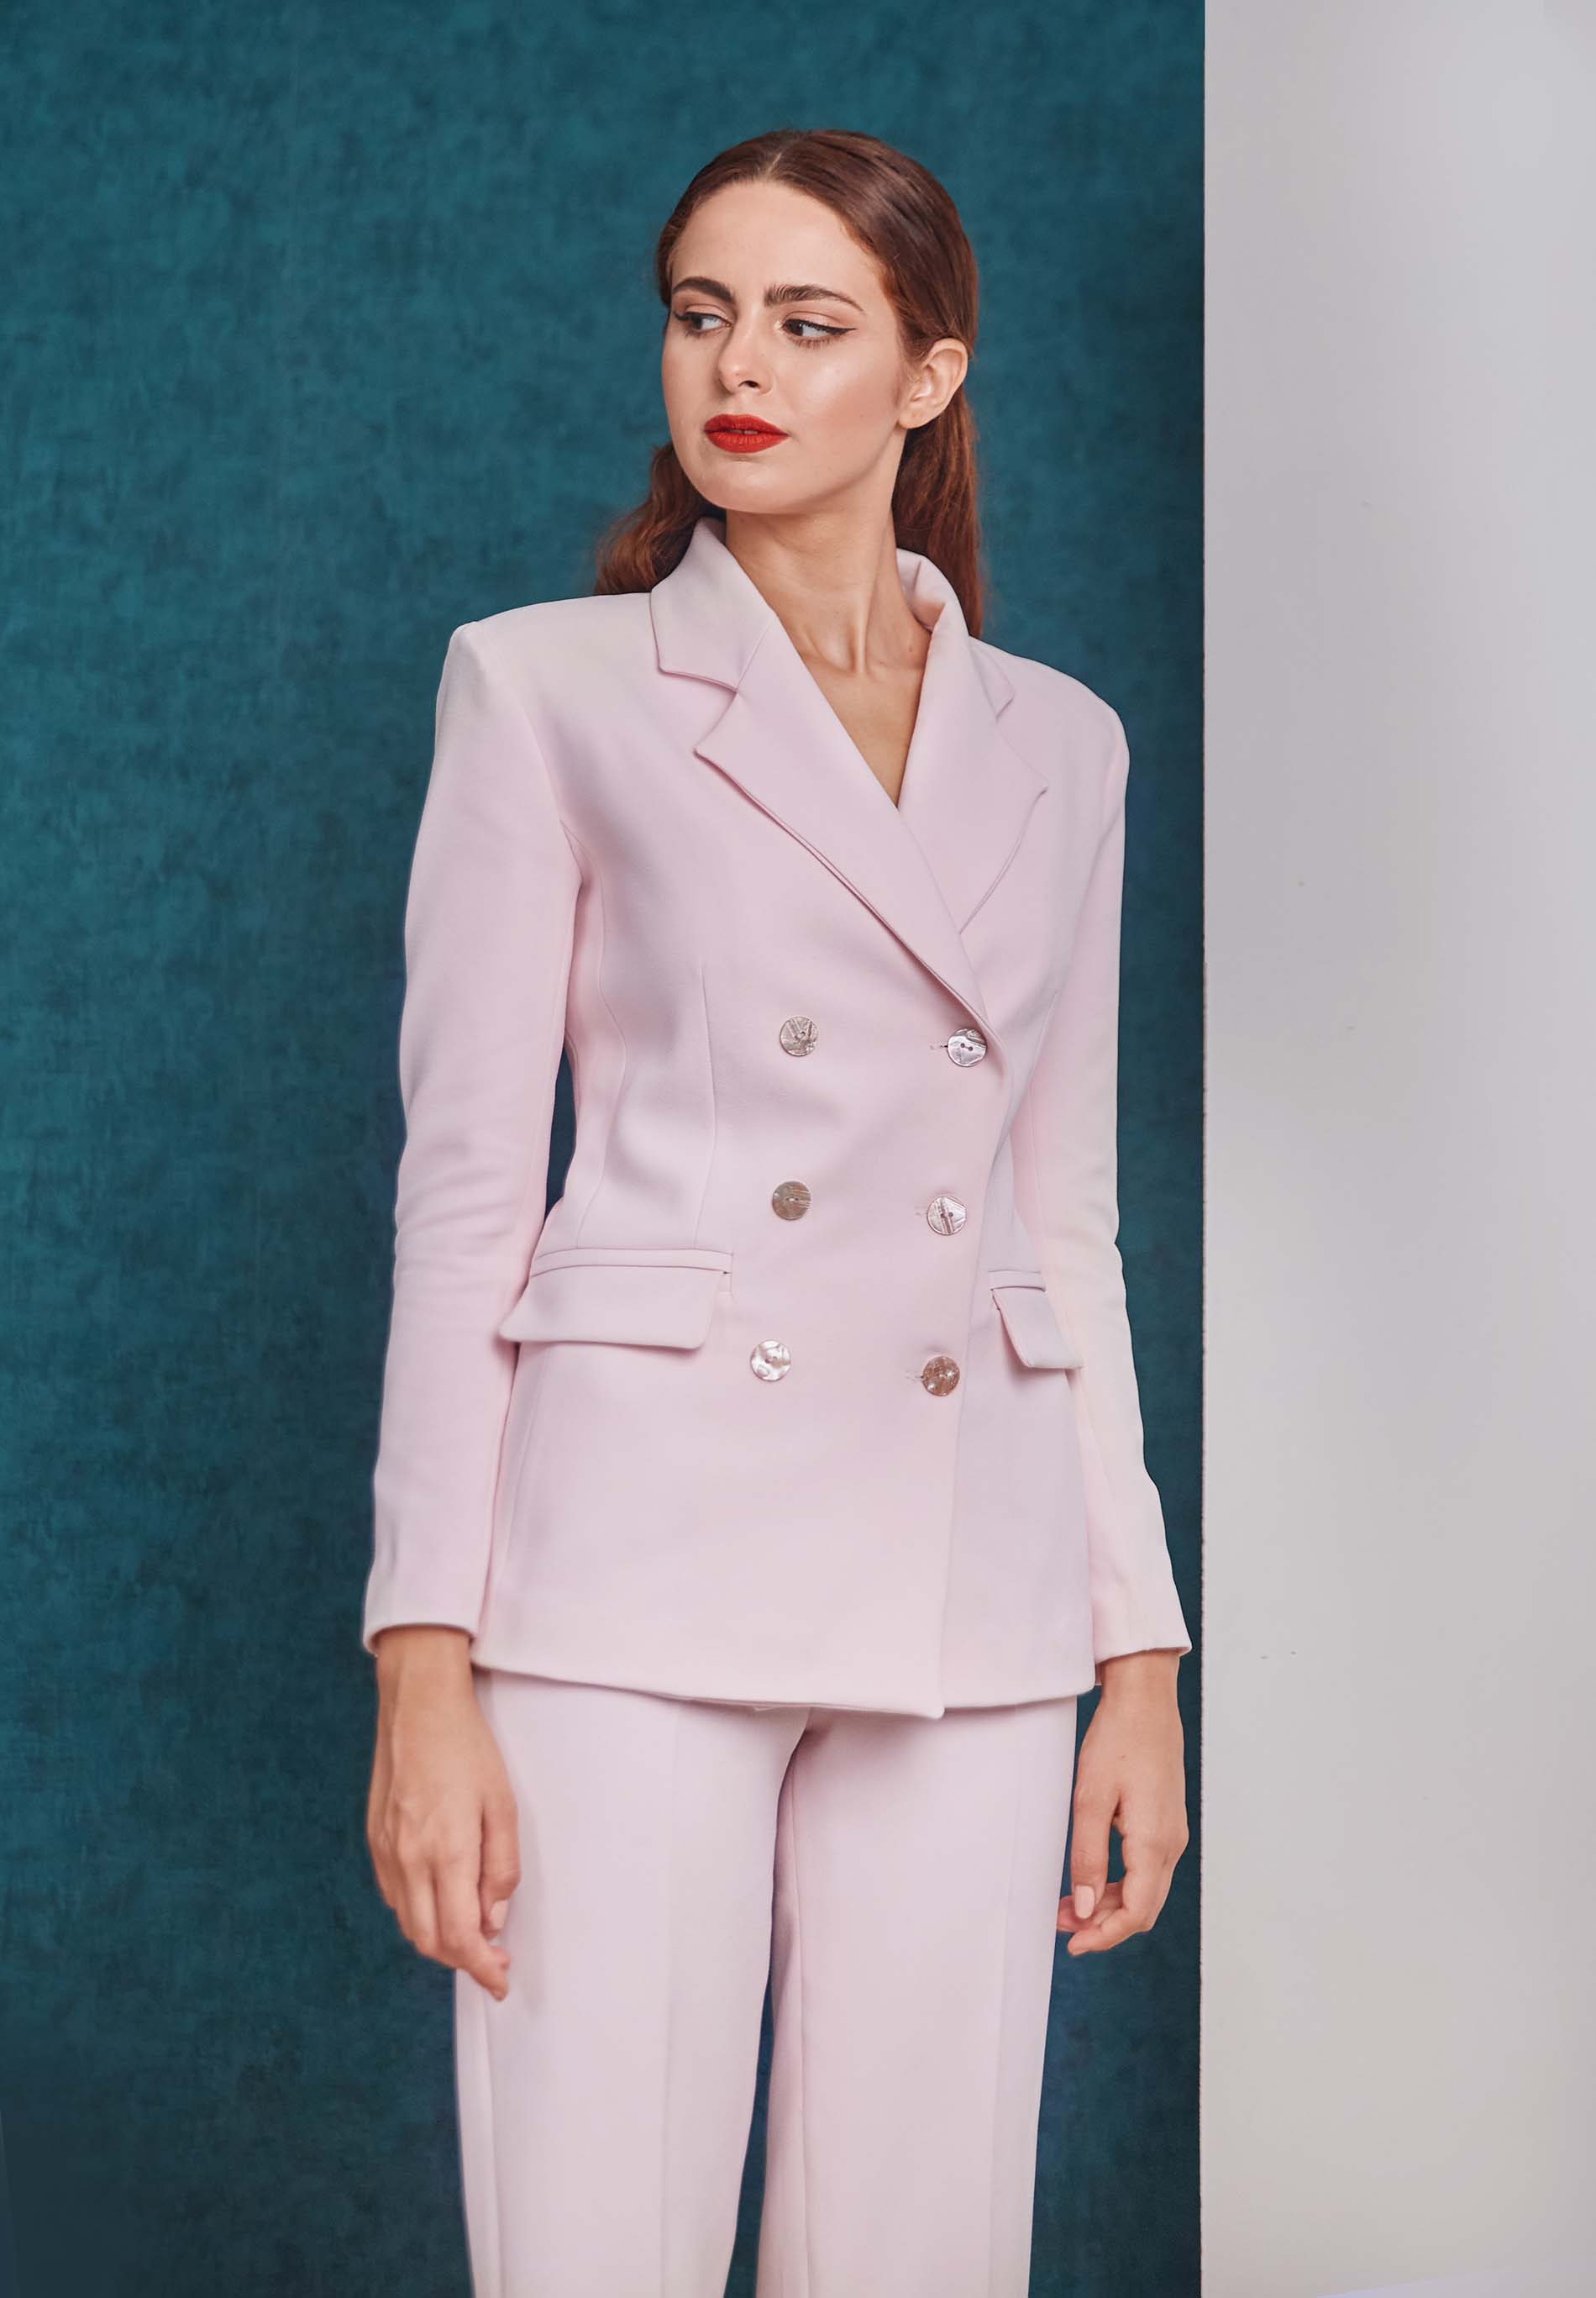 Tailored double breasted pink blazer and pink pant look